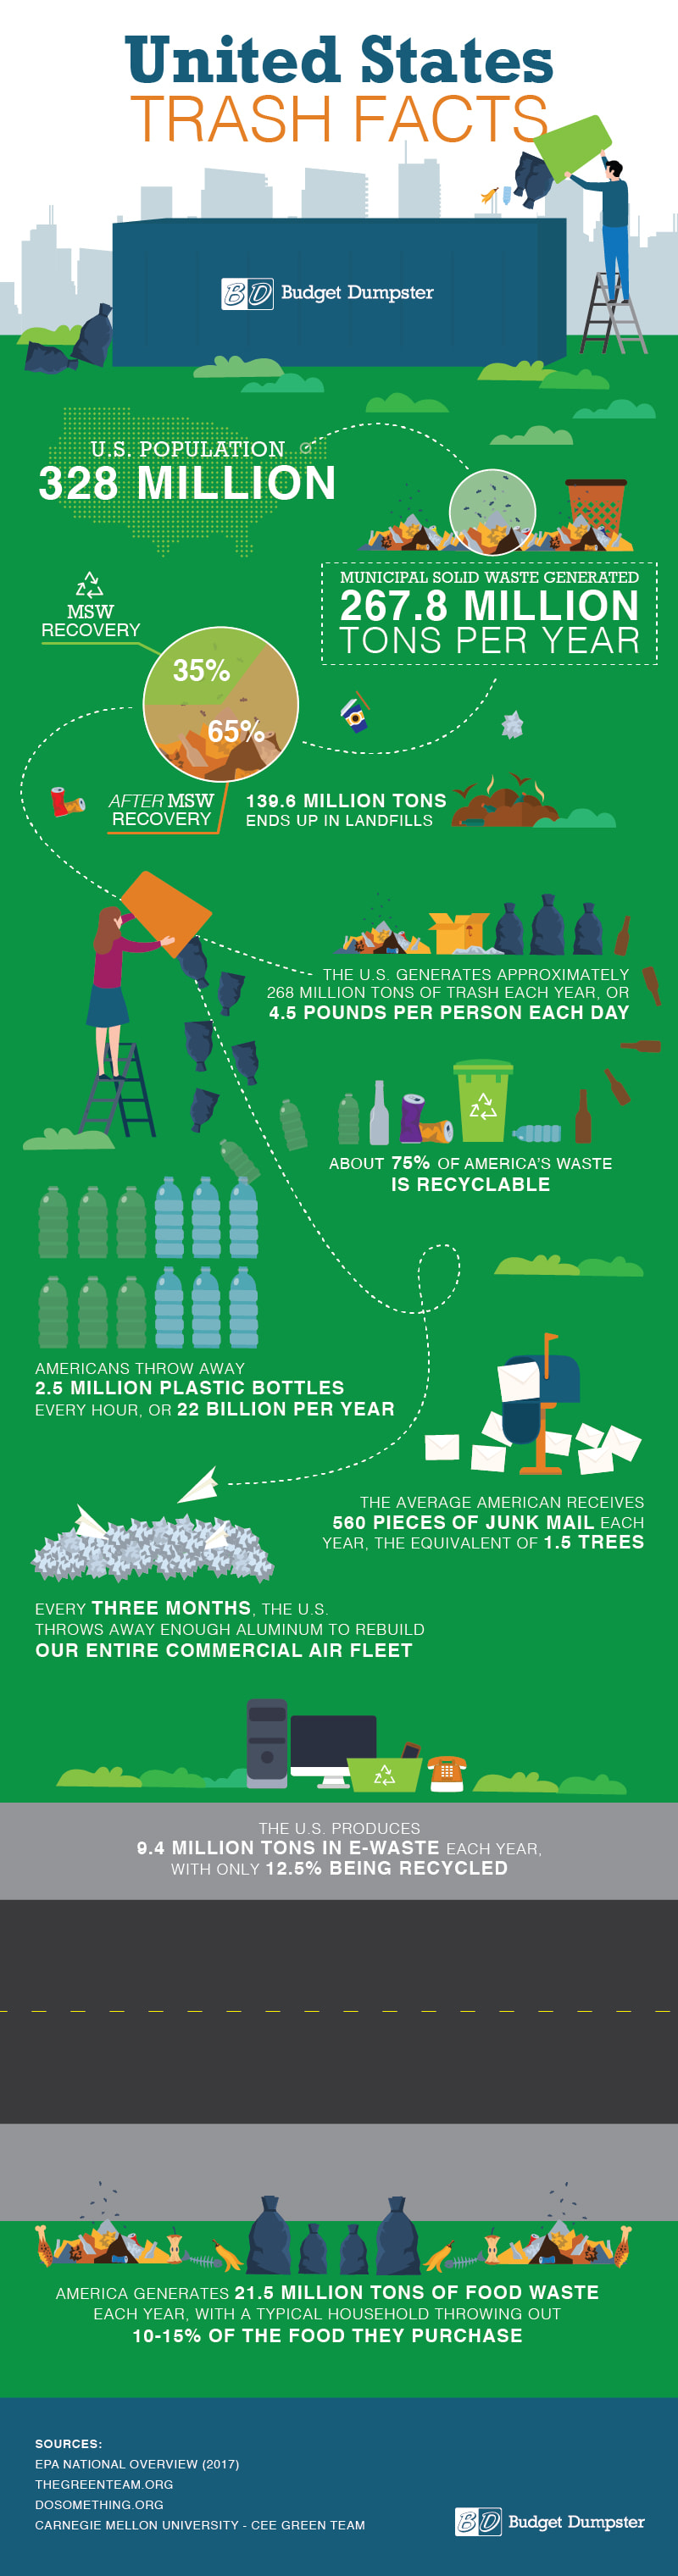 How To Create An Infographic On Solid Waste